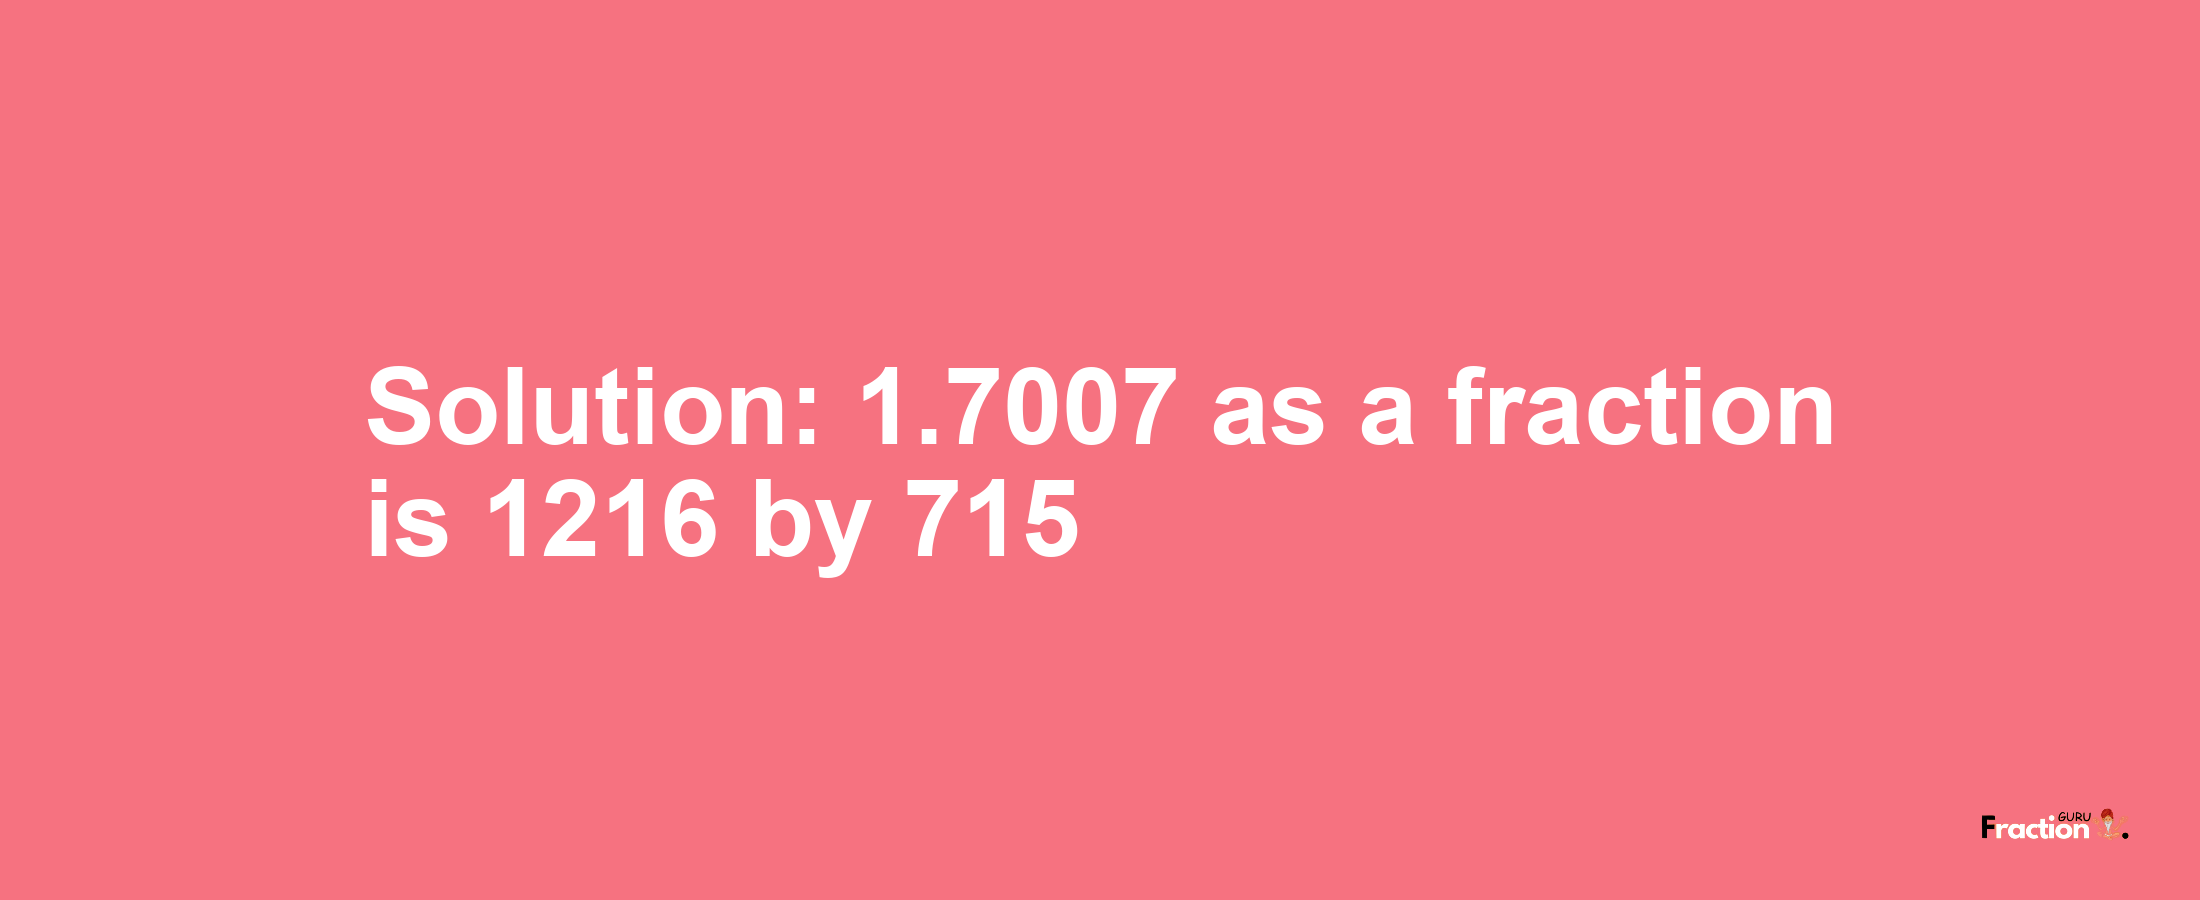 Solution:1.7007 as a fraction is 1216/715